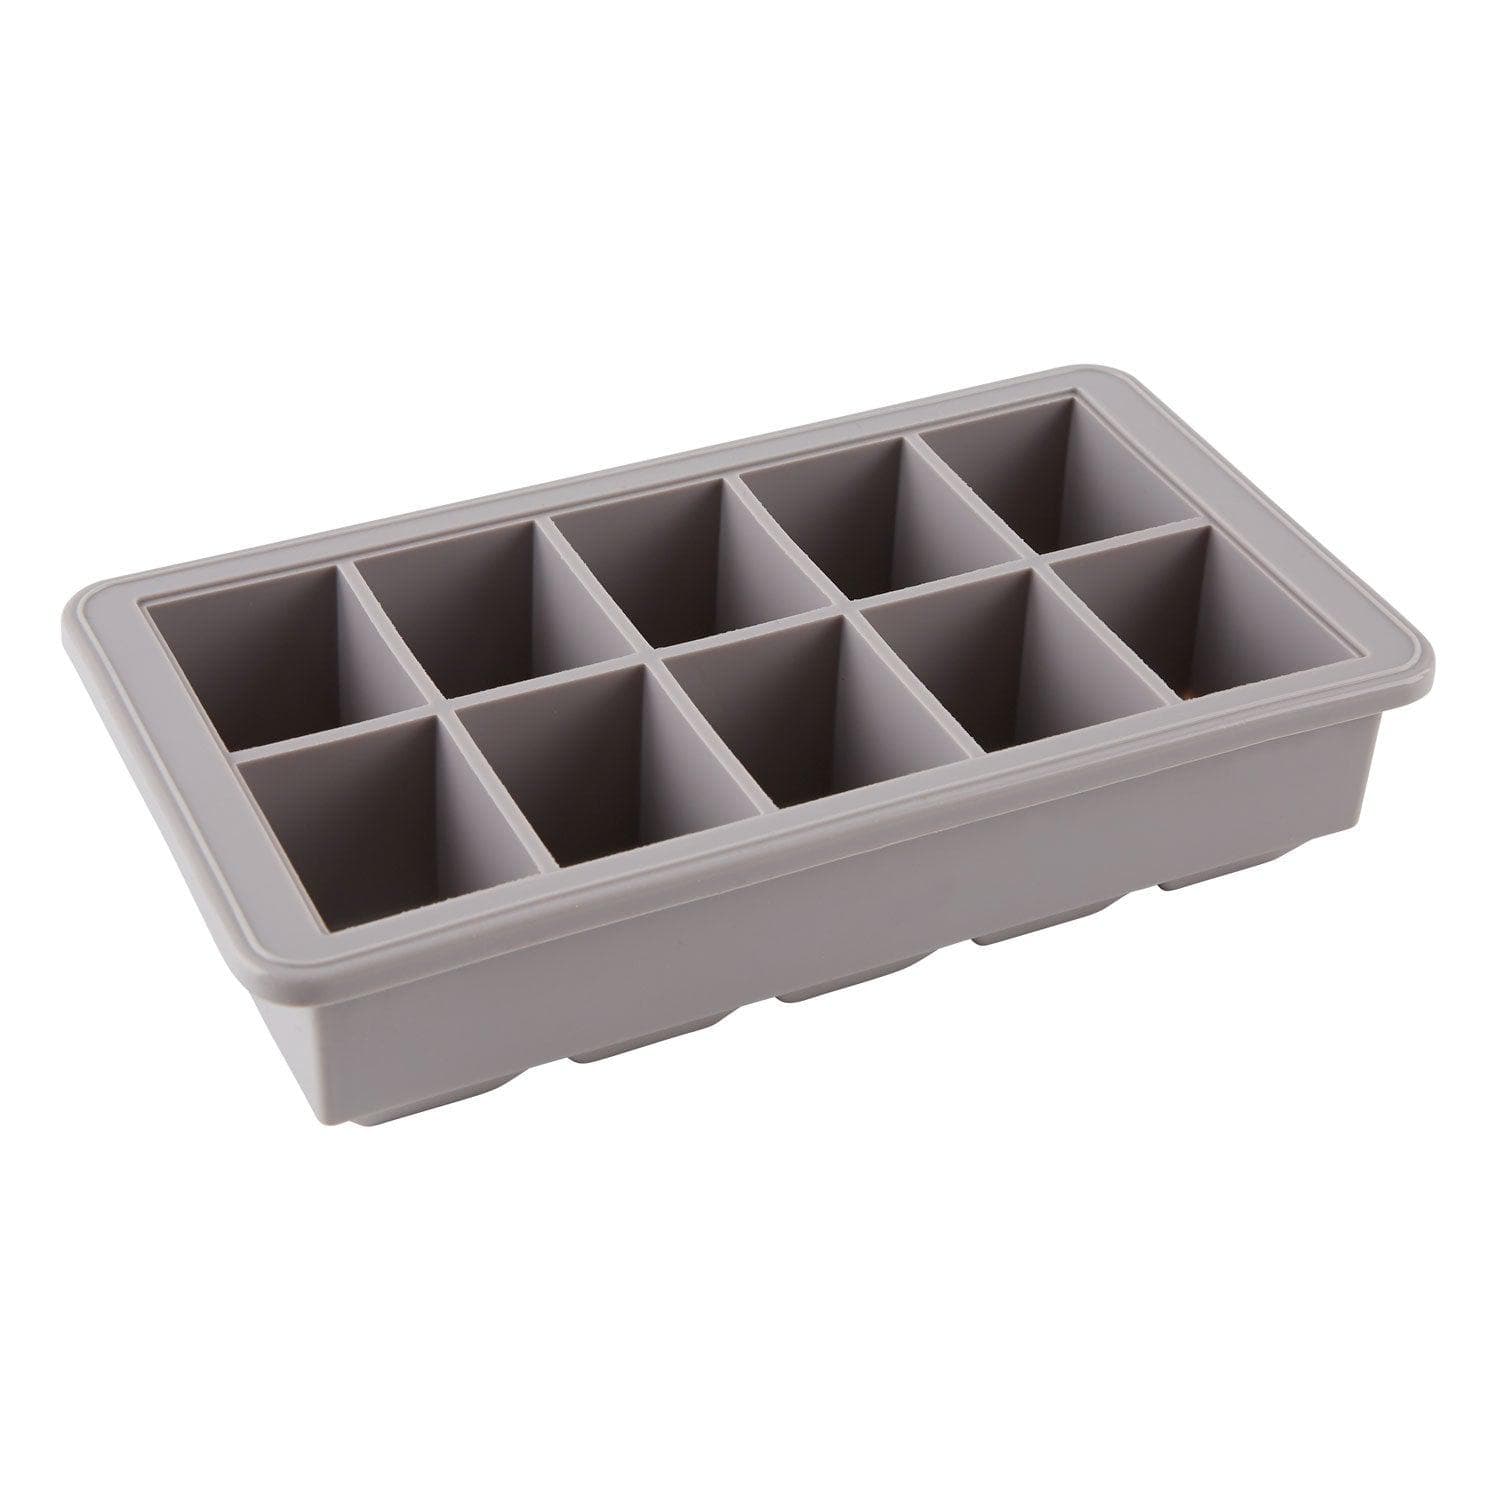 Grey herb block tray with no lid